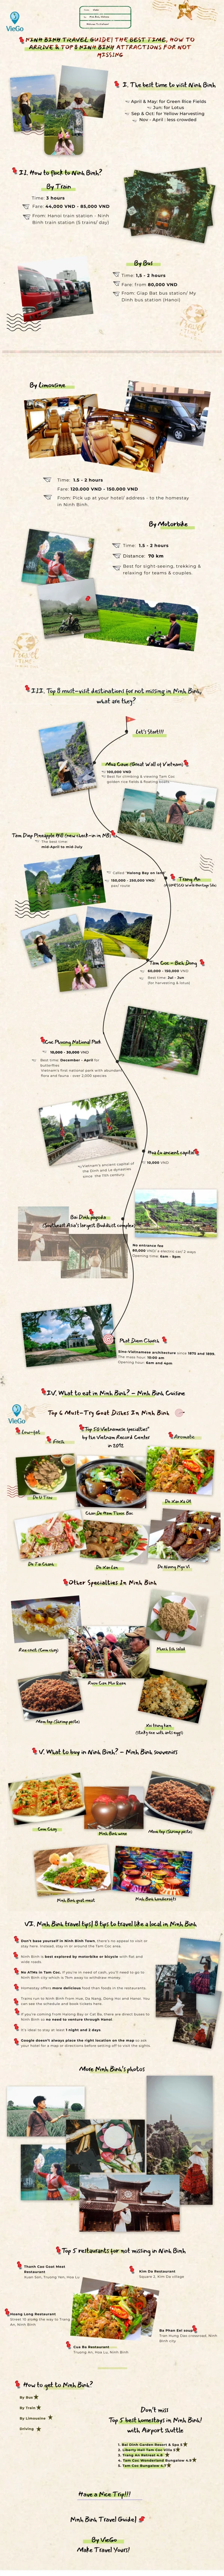 Viego Travel - All in one travel guides for Ninh Binh, Vietnam